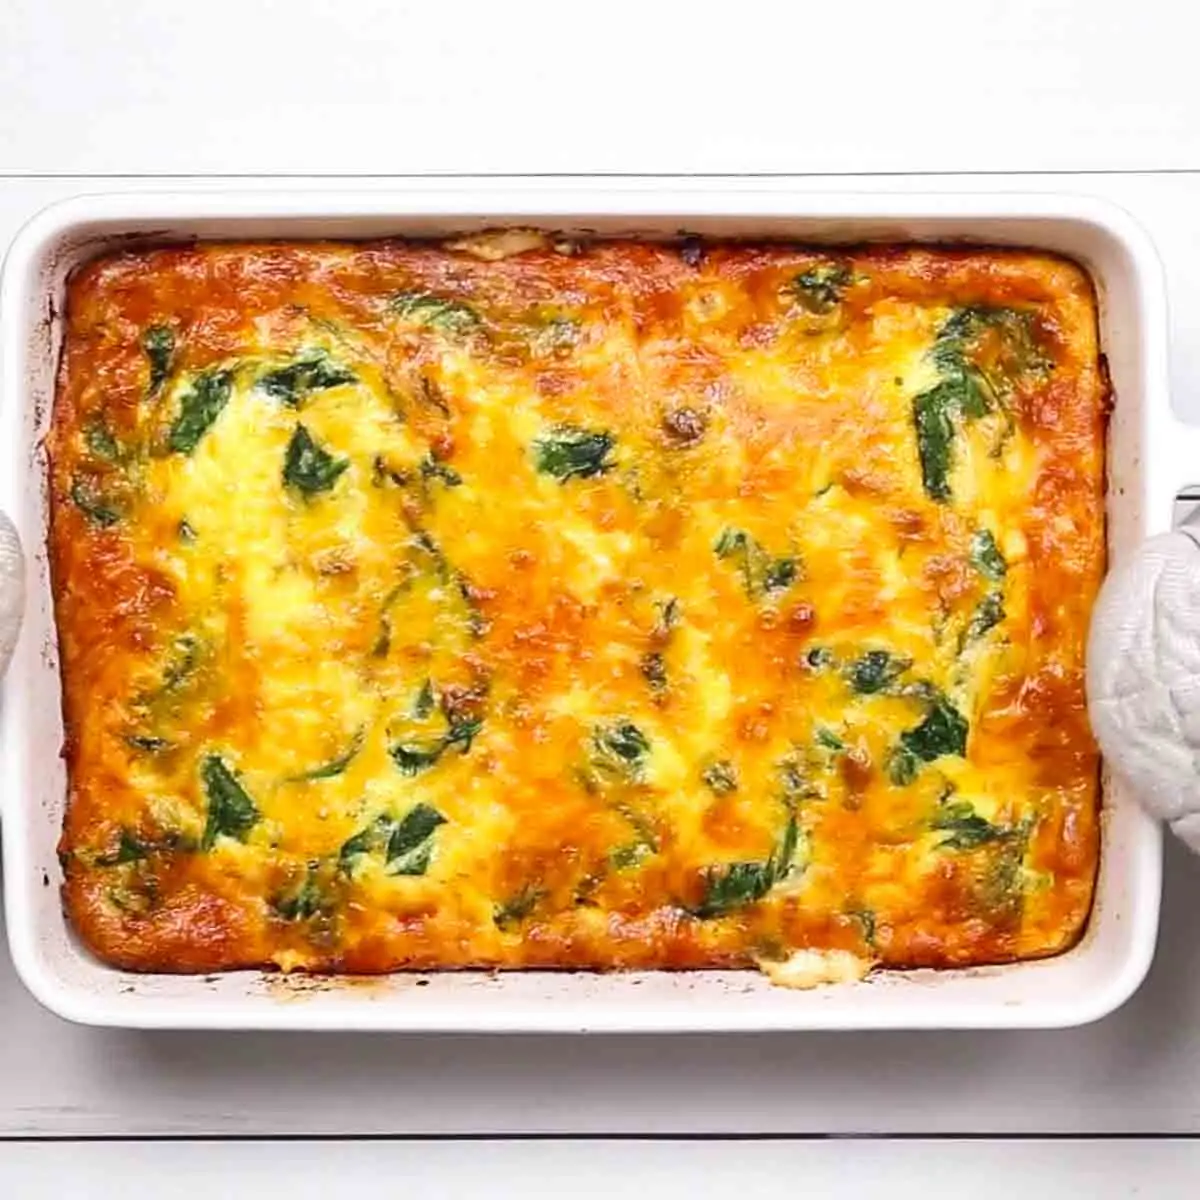 Baked Spinach and Sausage Quiche with melted cheese and spinach in a white dish.